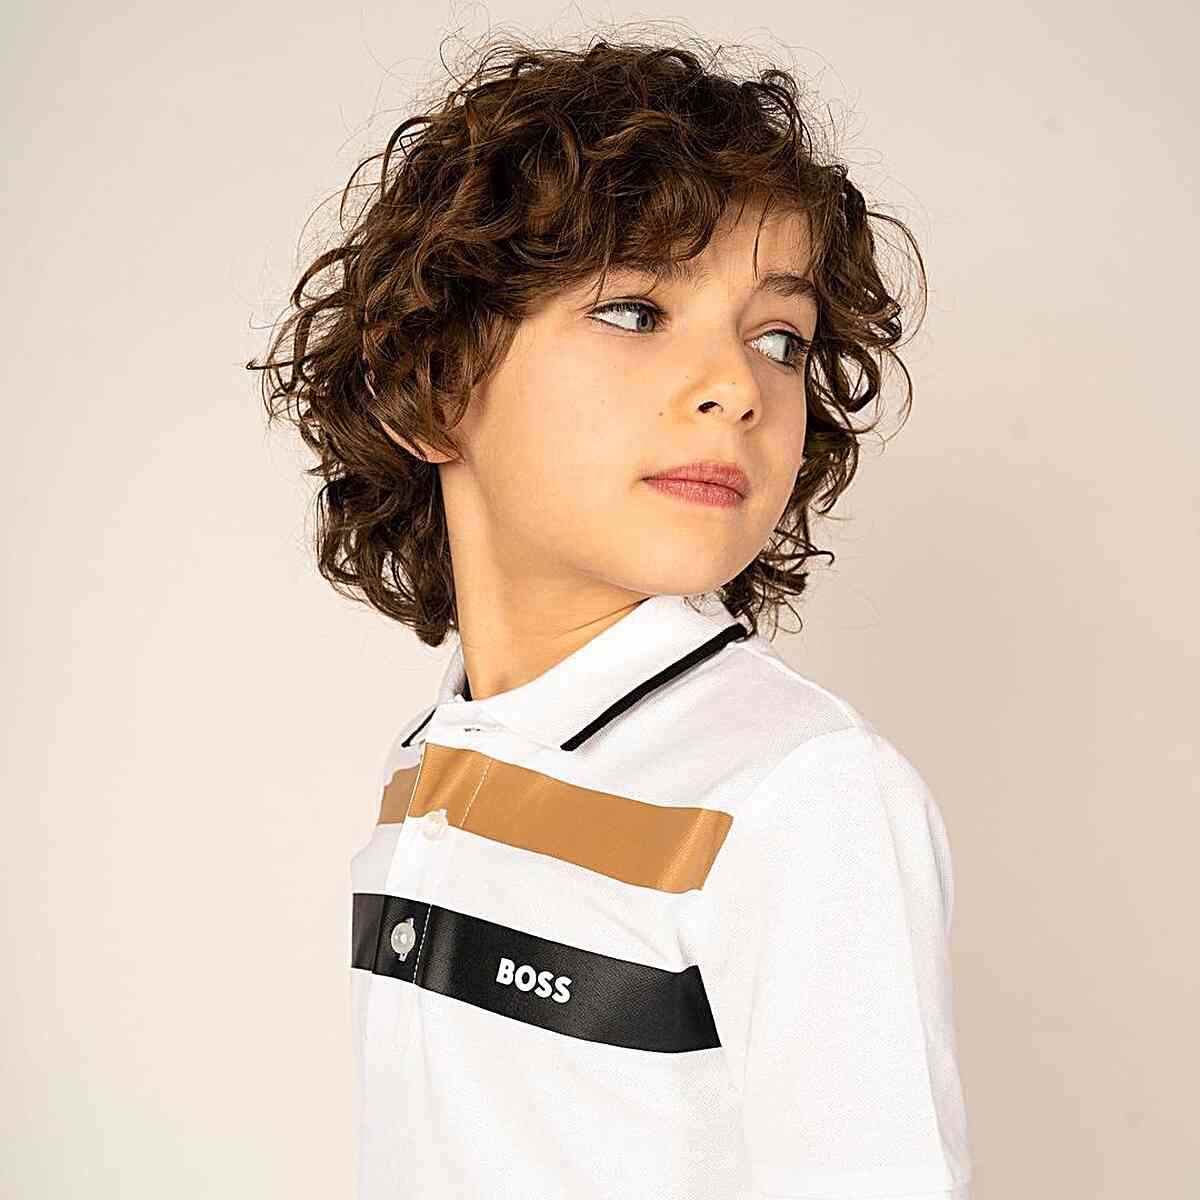 Chin-Length Layered Curly Cut with Fringe for Boys